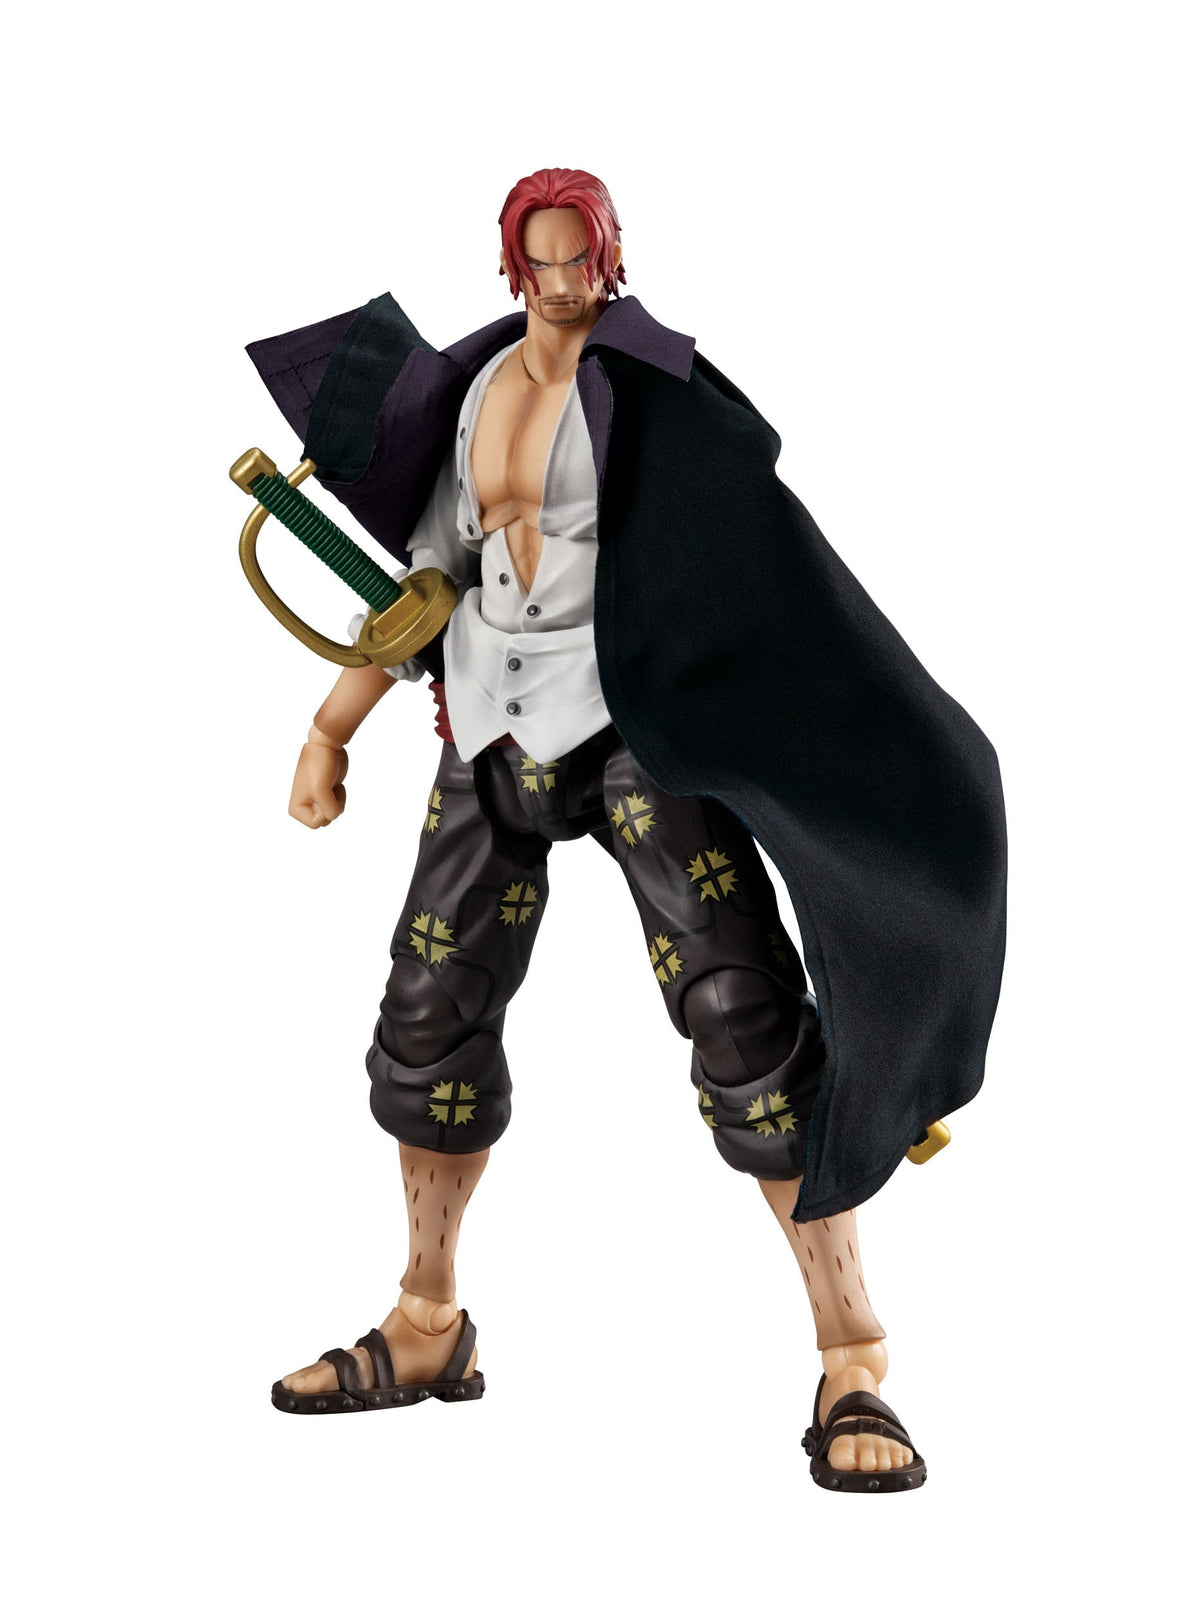 One Piece - Shanks - Action Figure (Megahouse)